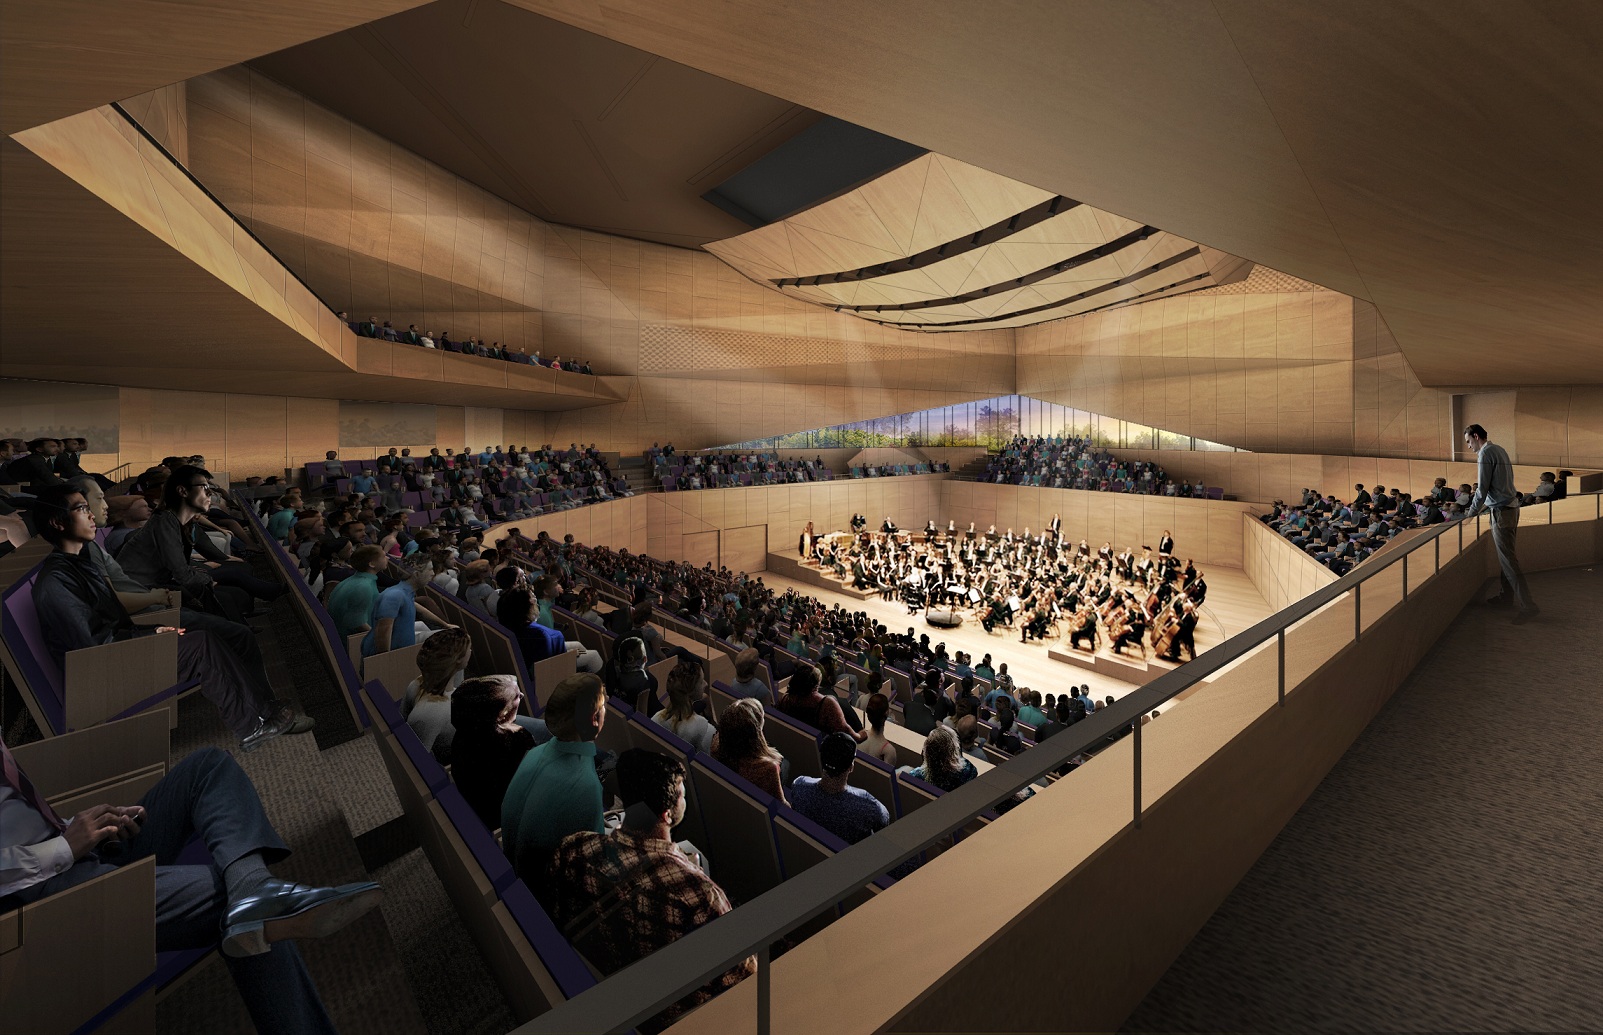 View of Main Concert Hall. Image courtesy of Diller Scofidio + Renfro